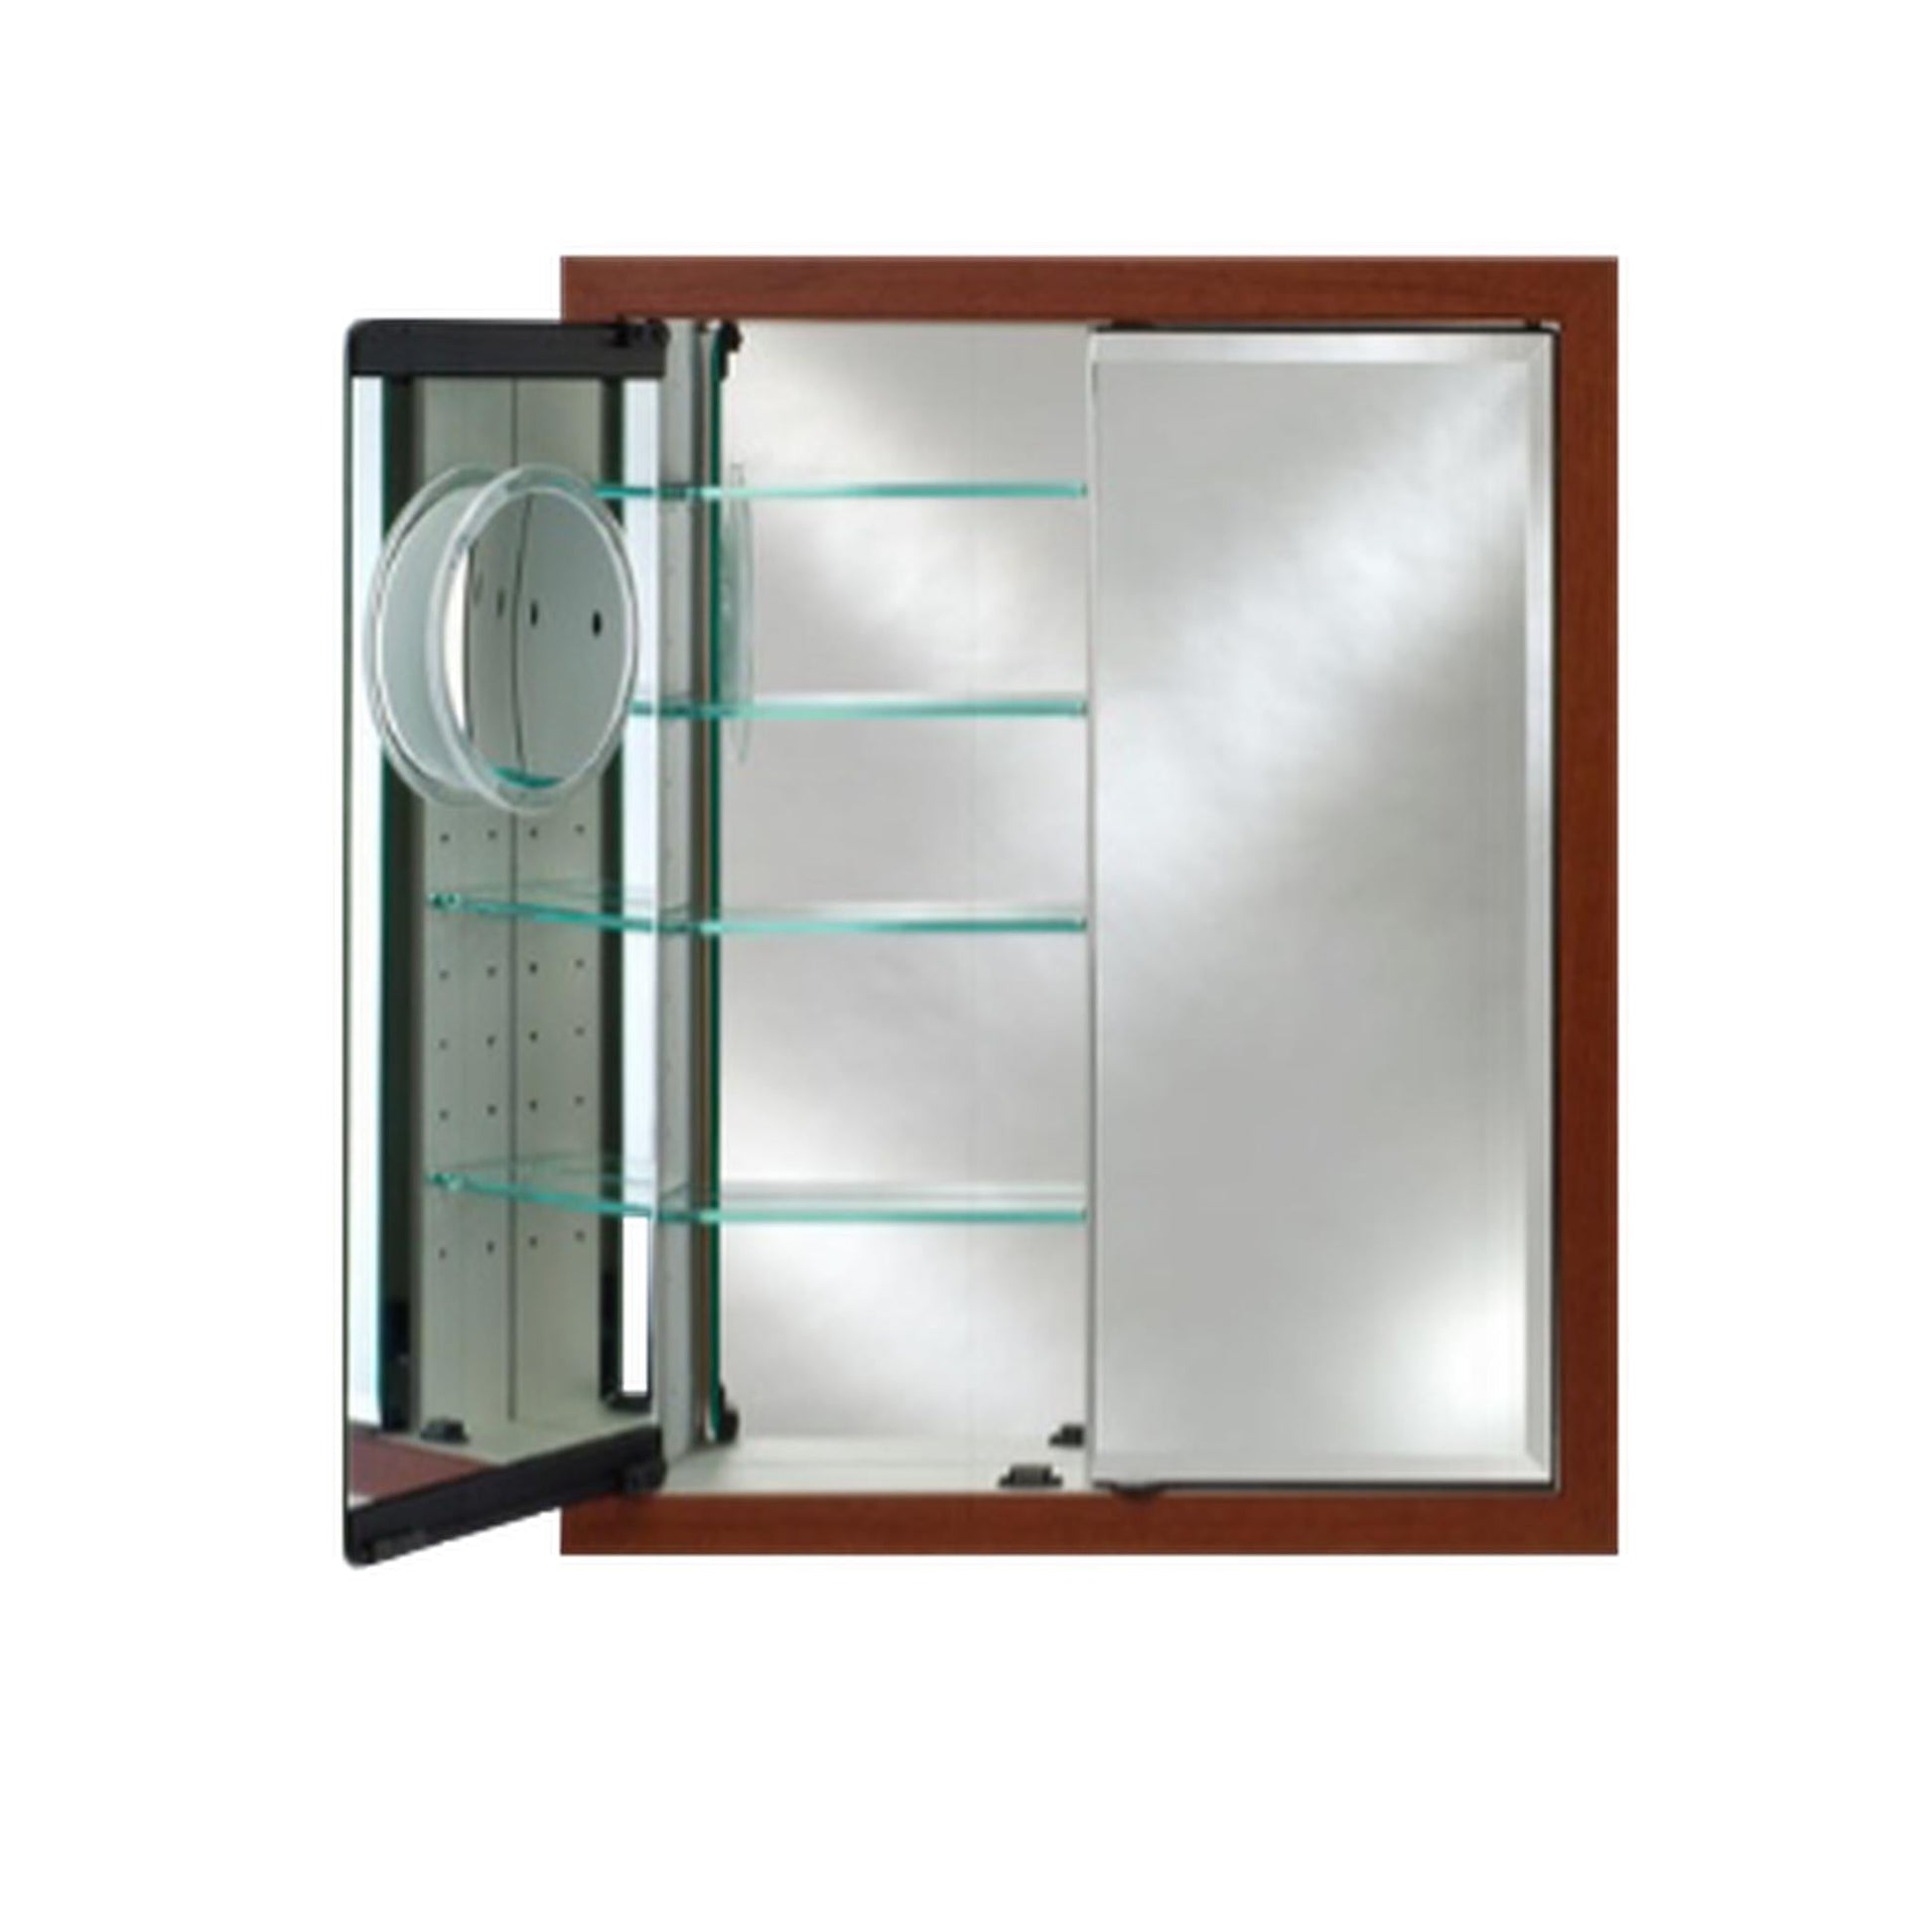 Afina Signature 27" x 21" Polished Glimmer-Flat Recessed Retro-Fit Double Door Medicine Cabinet With Beveled Edge Mirror